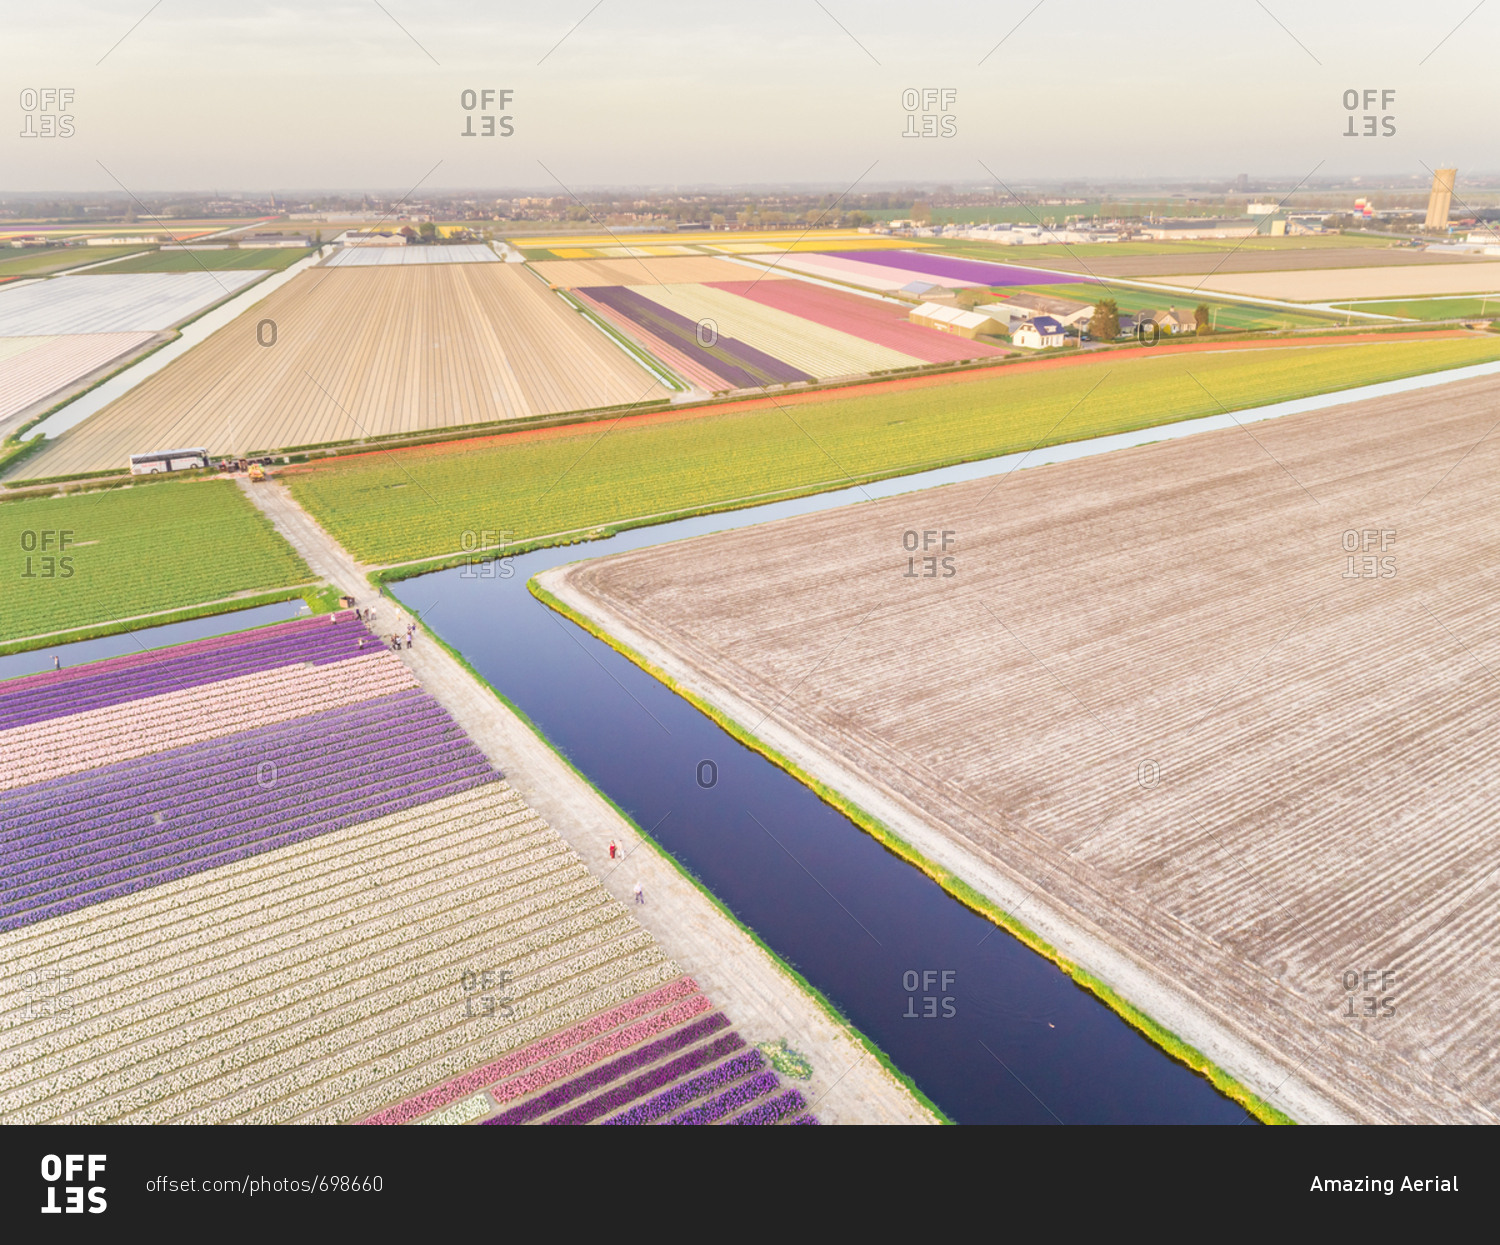 Amazing aerial view of beautiful colorful tulip fields in Lisse, Netherlands